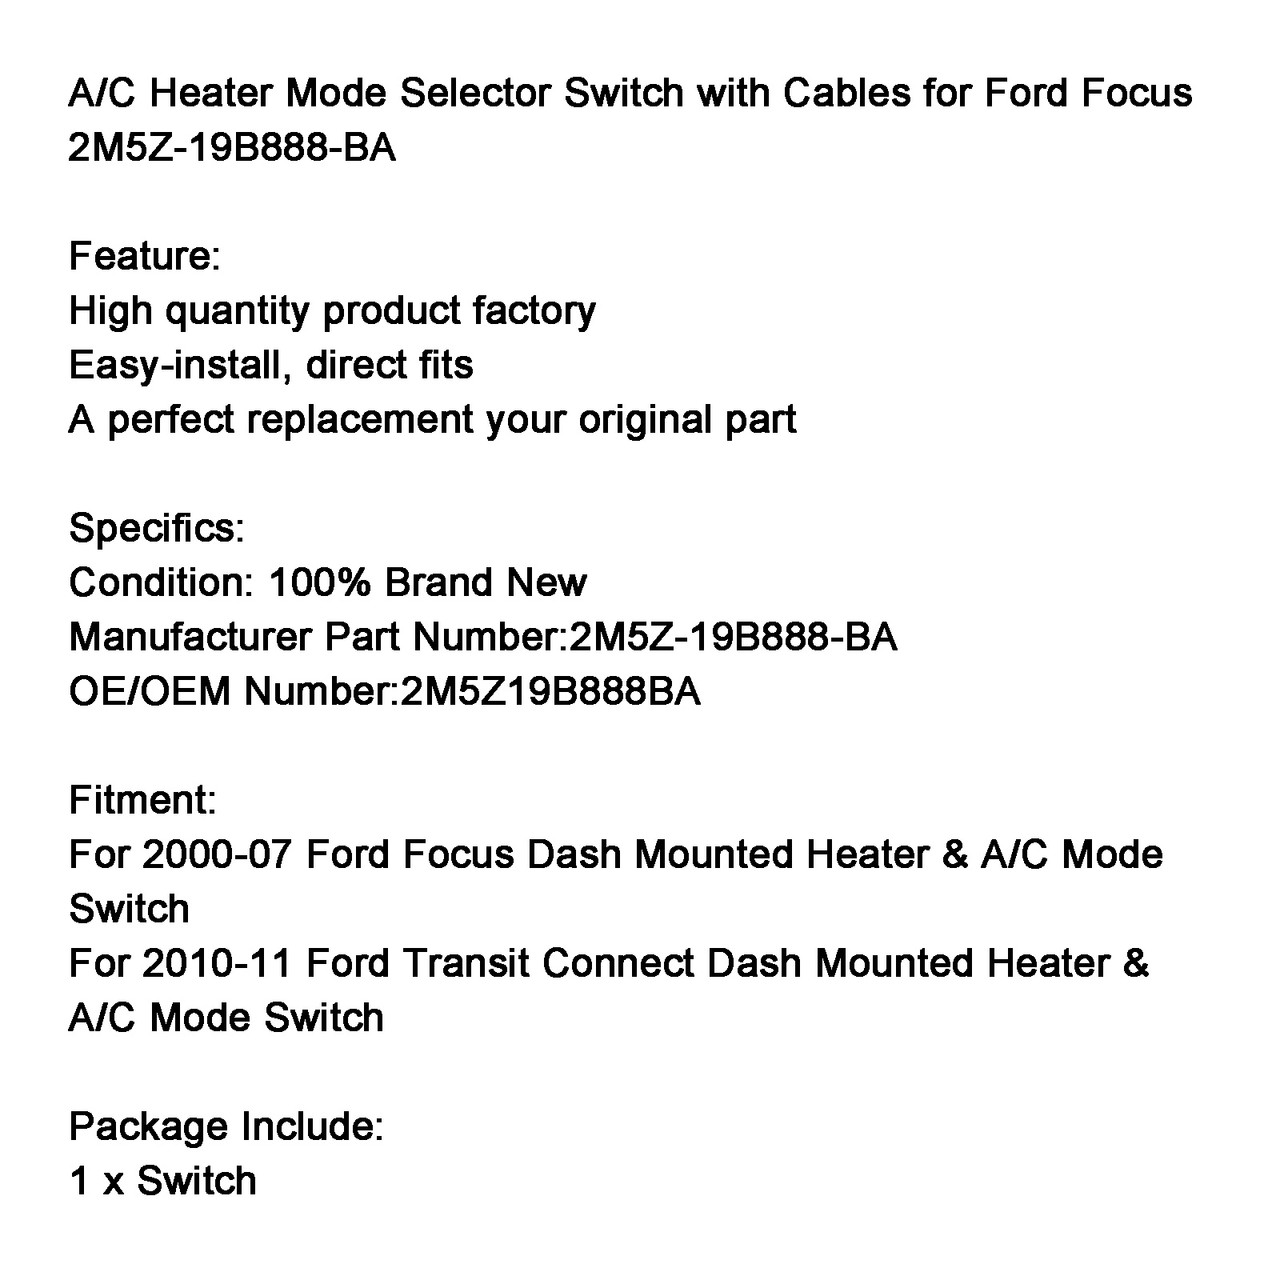 A/C Heater Mode Selector Switch with Cables for Ford Focus 2M5Z-19B888-BA